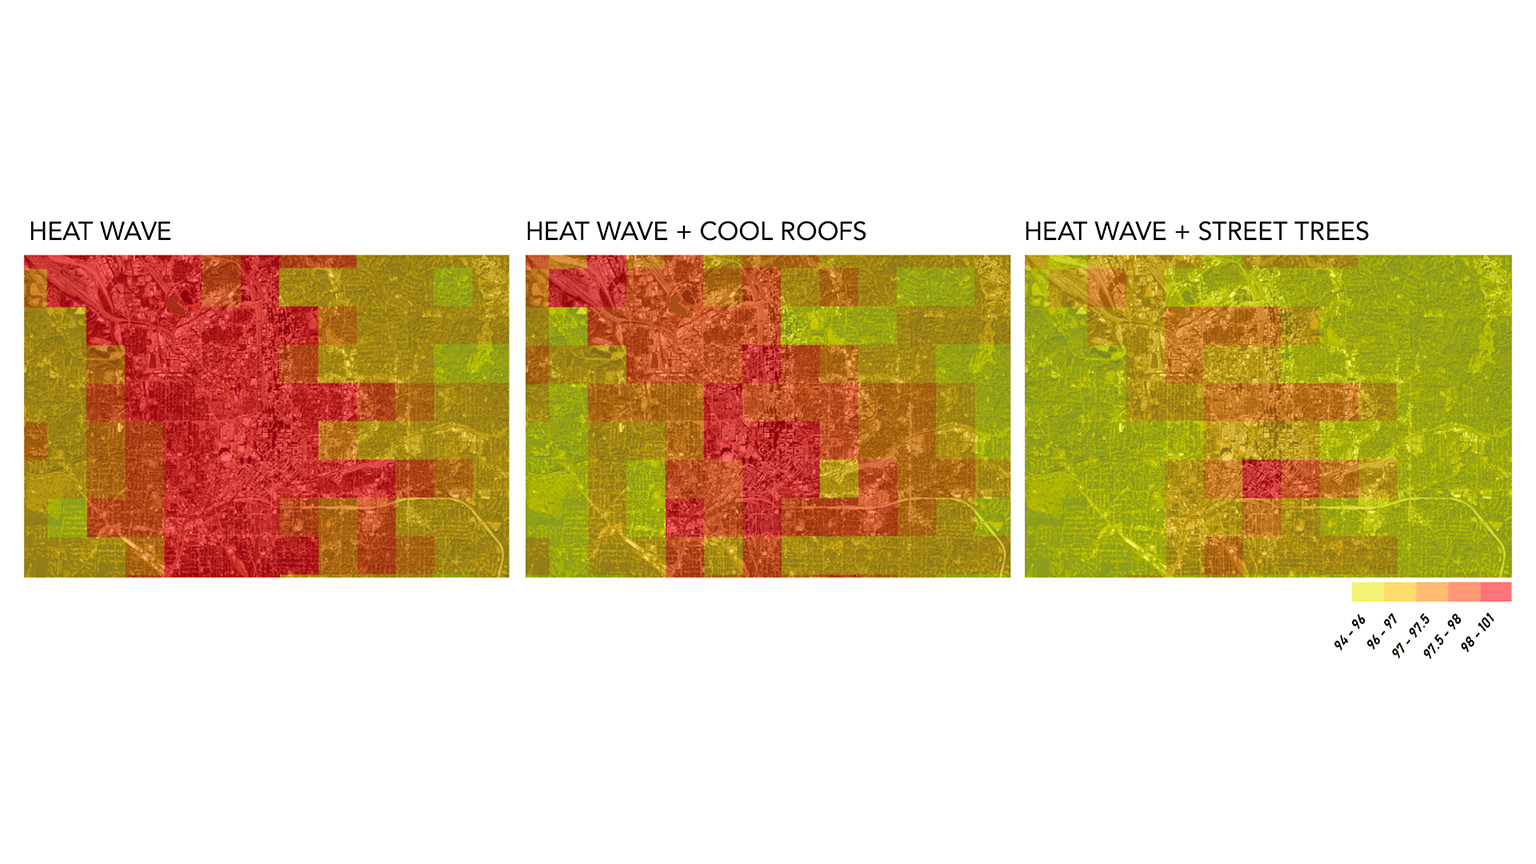 Brian Stone's heat wave study showing a temperature map of heat wave, heat wave plus cool roofs, and heat wave plus street trees. 